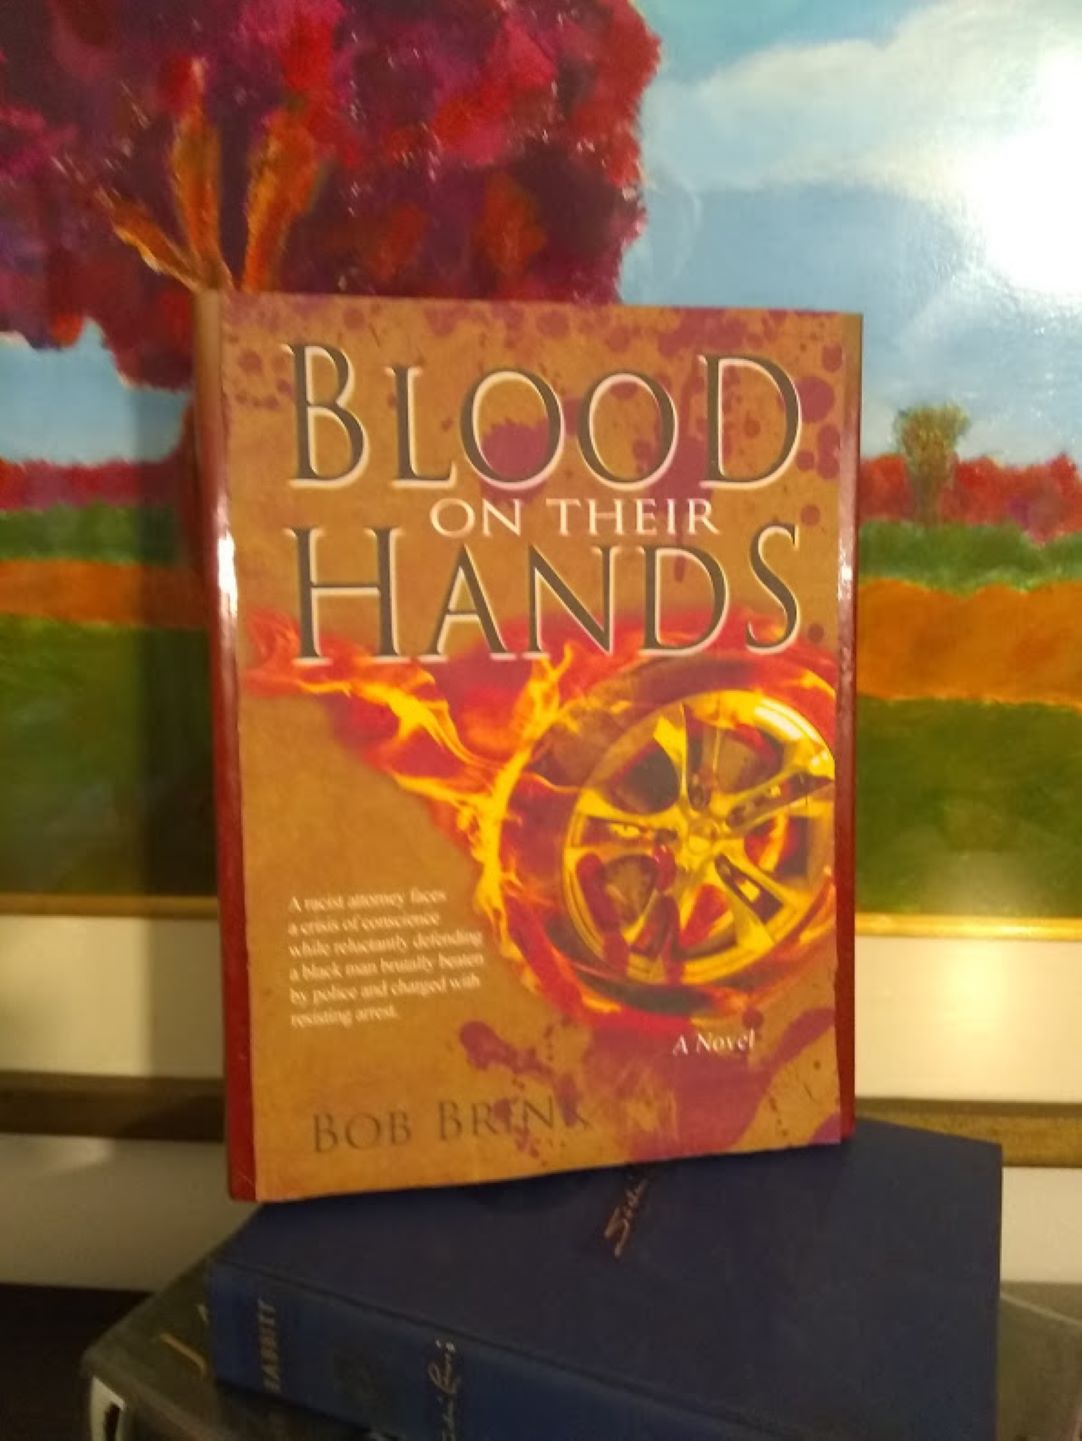 FREE: Blood on Their Hands: Weaving a Tangled Web by Bob Brink